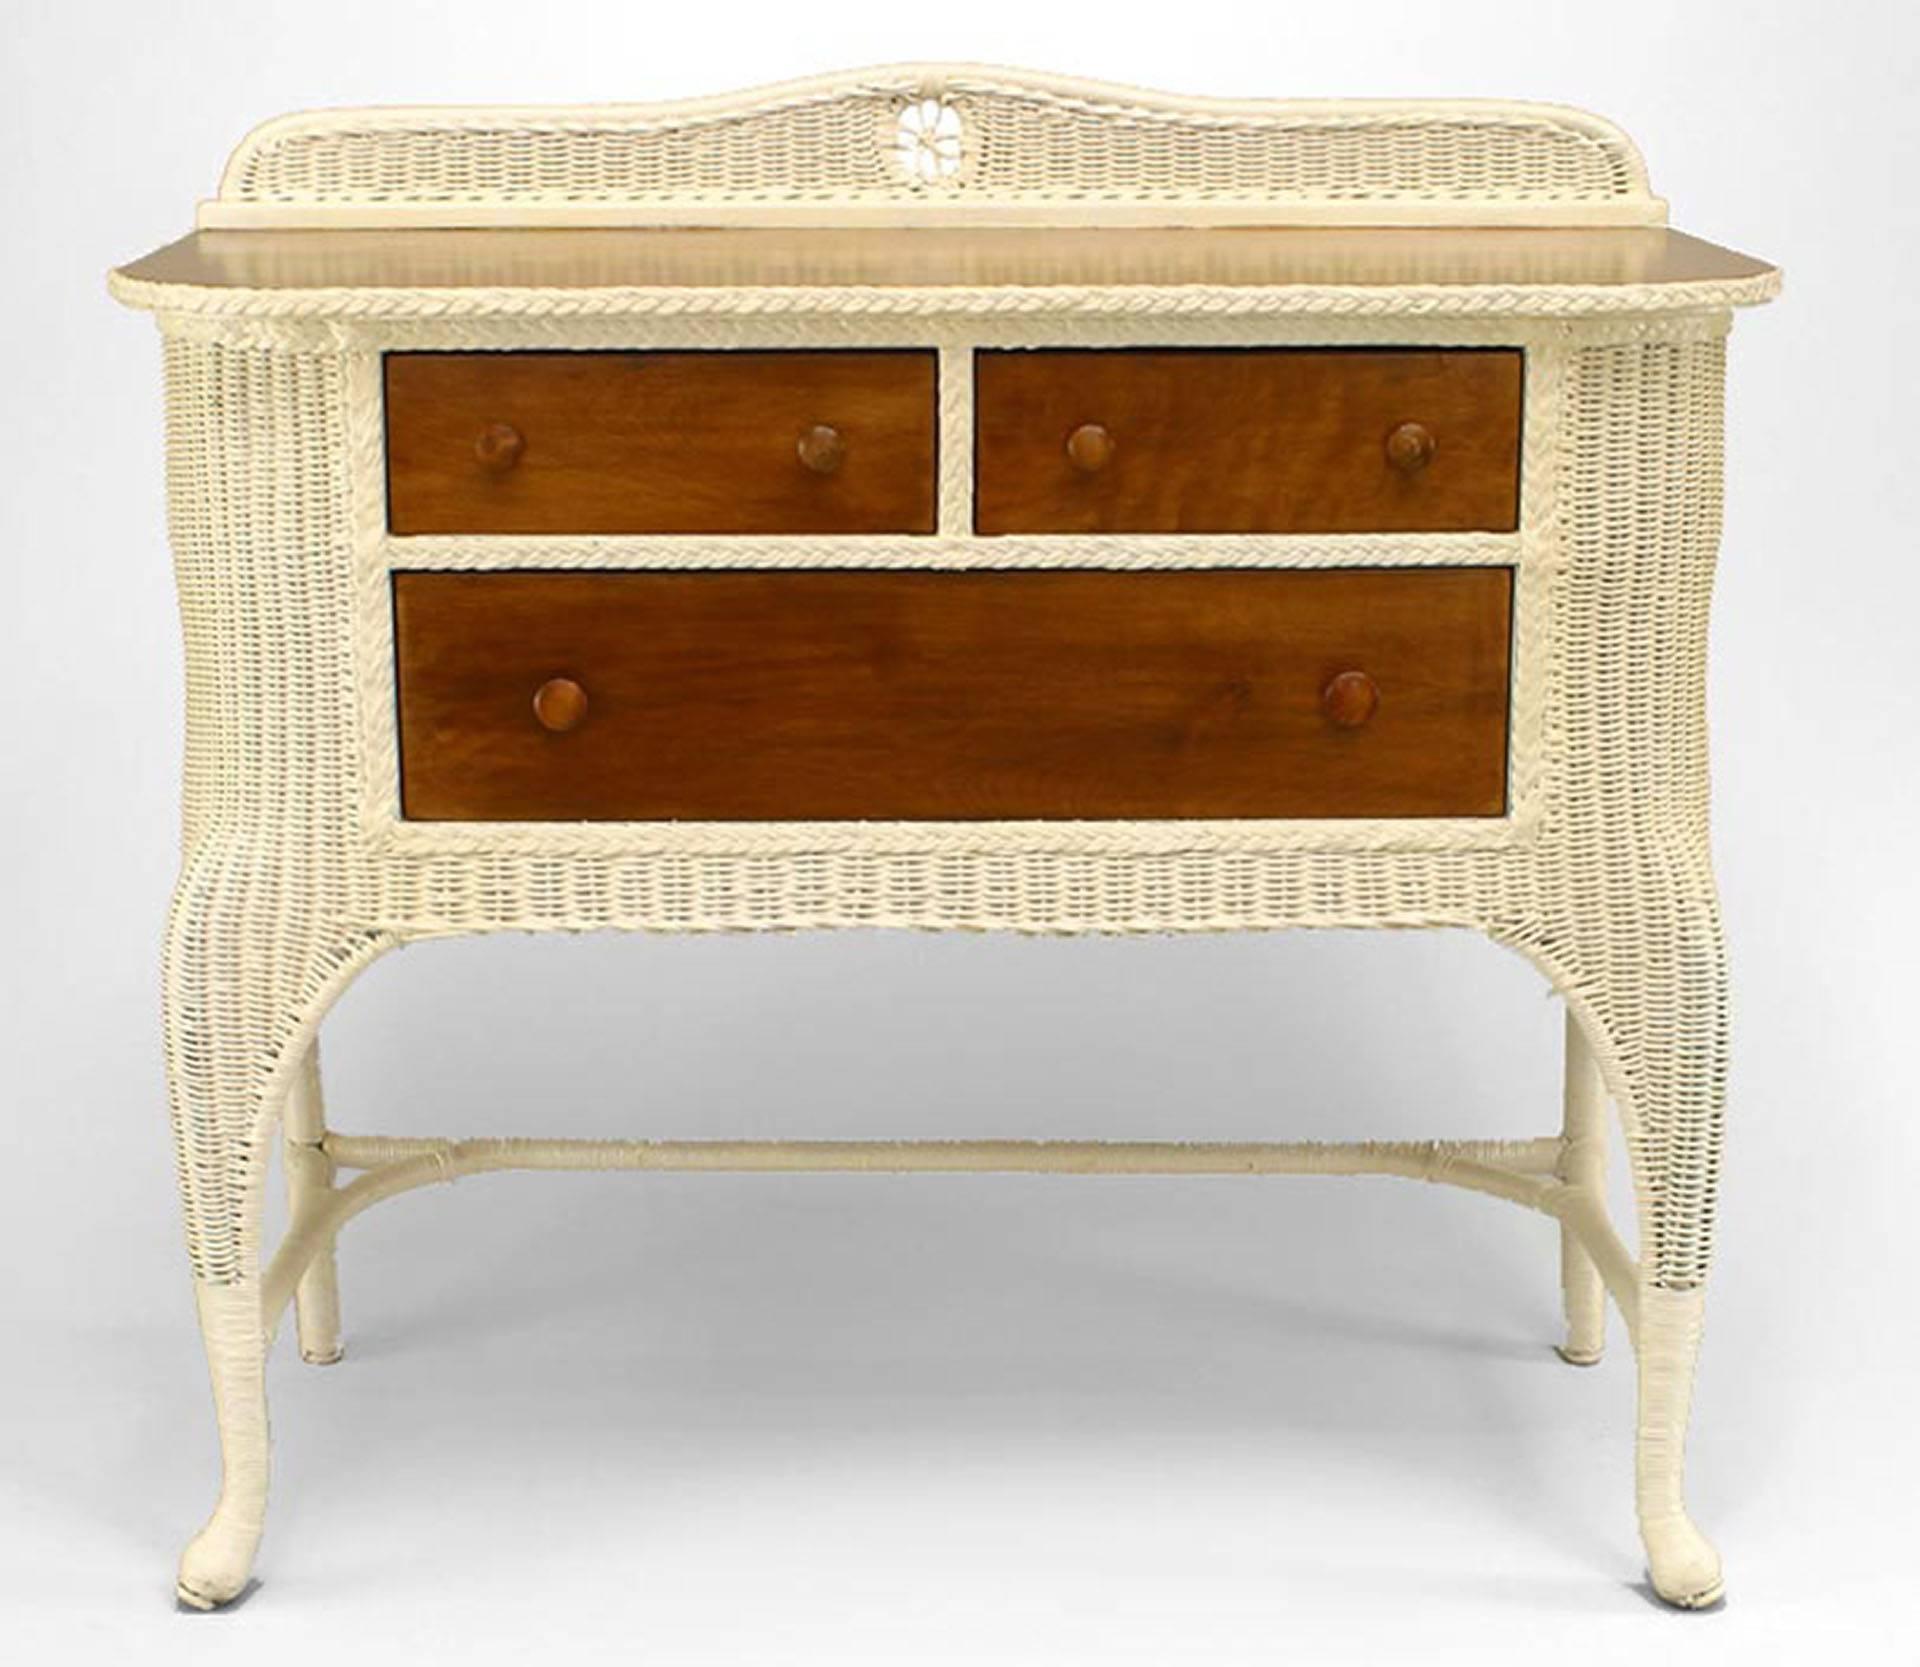 American Victorian white painted wicker sideboard with woven backrail and
cabriole legs with stripped maple drawers and top.